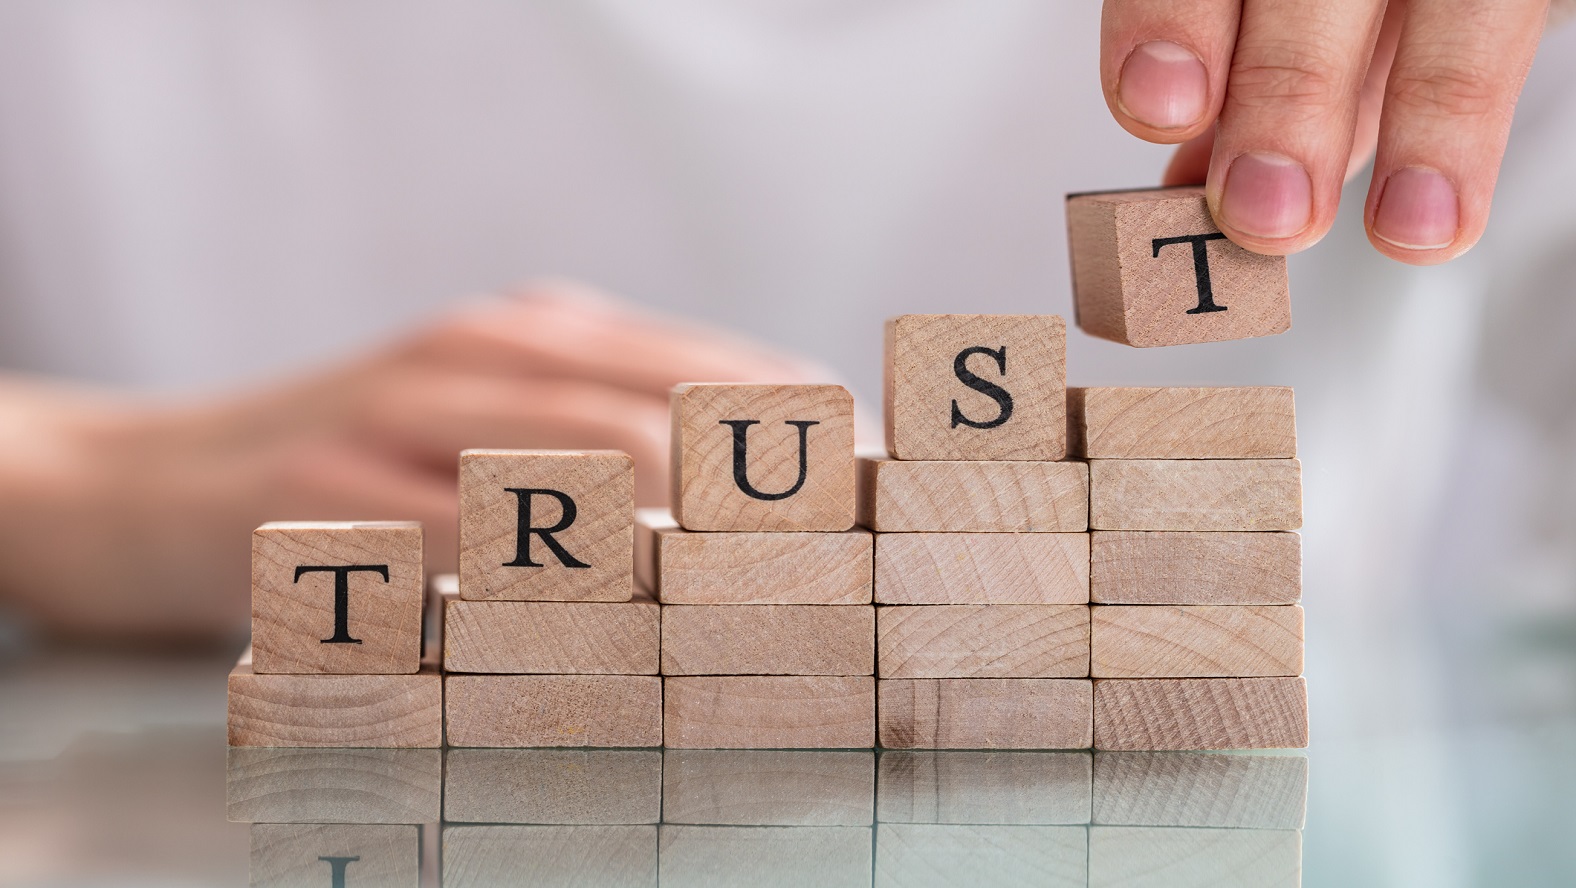 Insights into trust across cultures